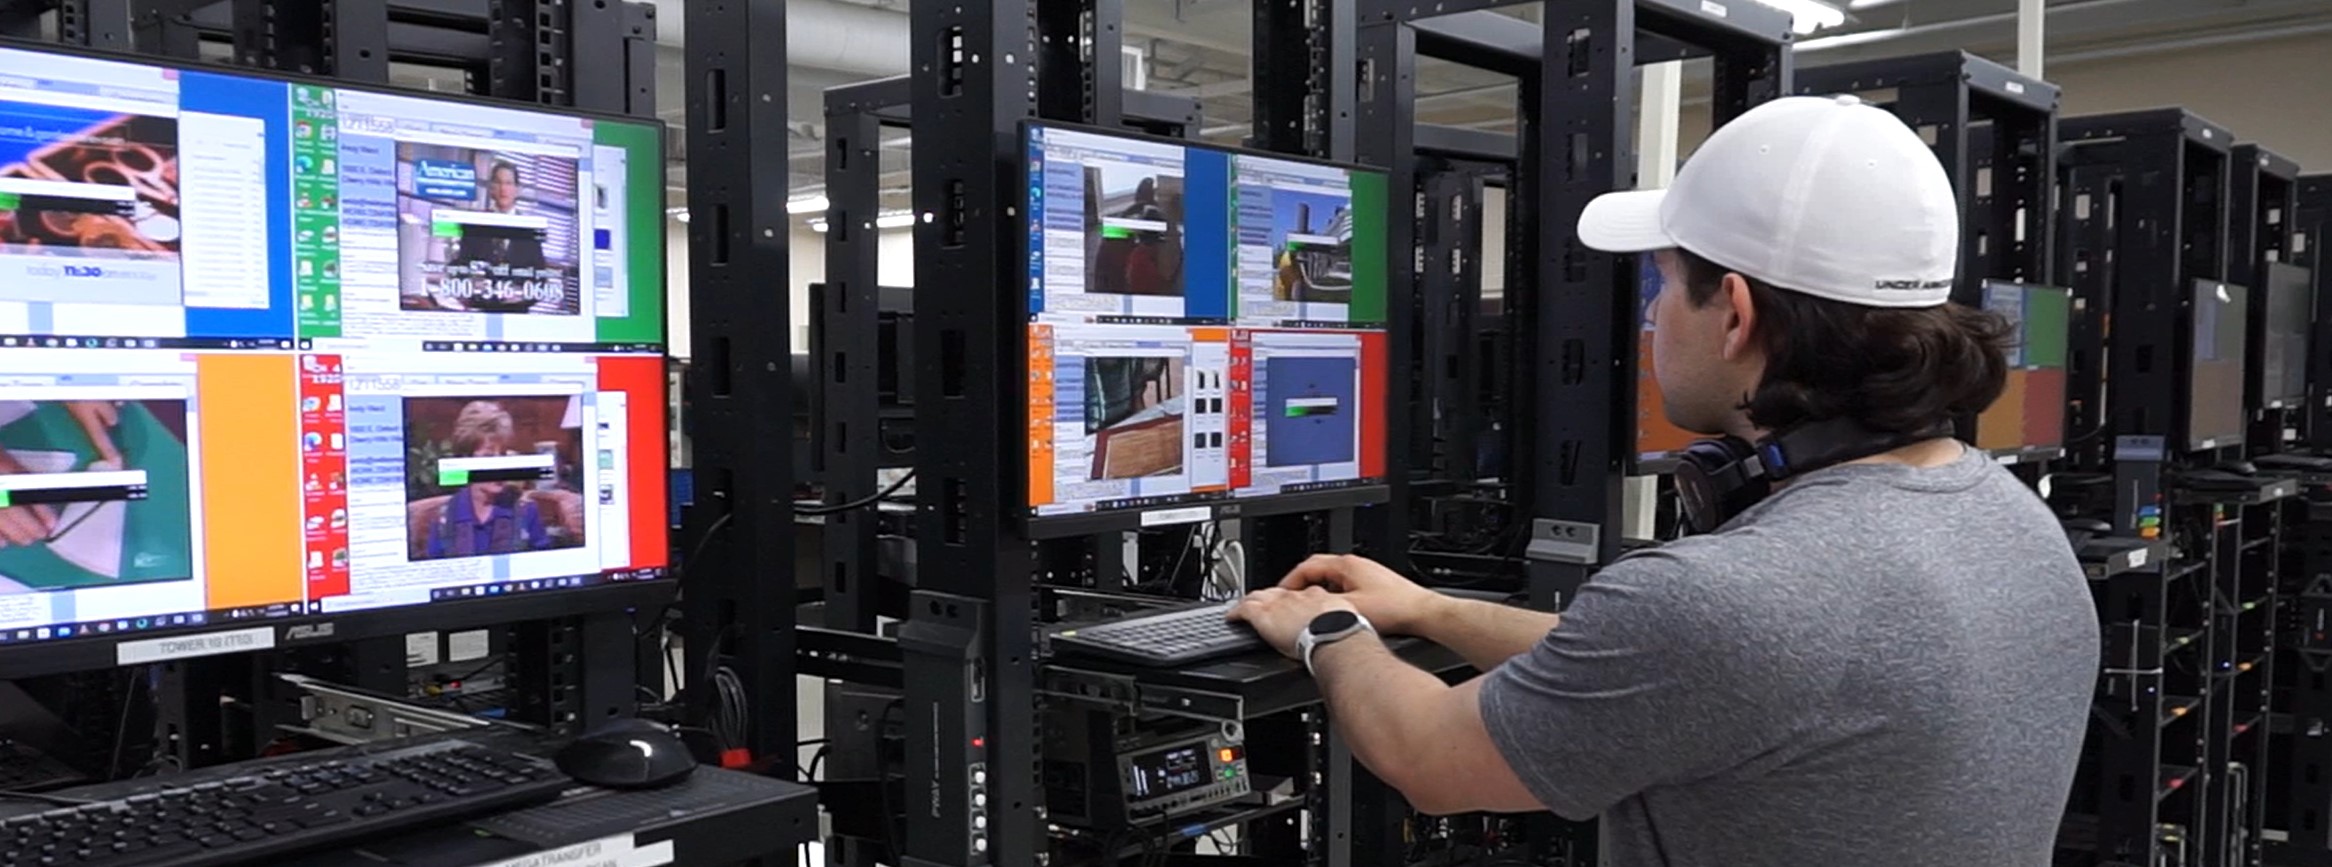 Technician digitizes video tapes 